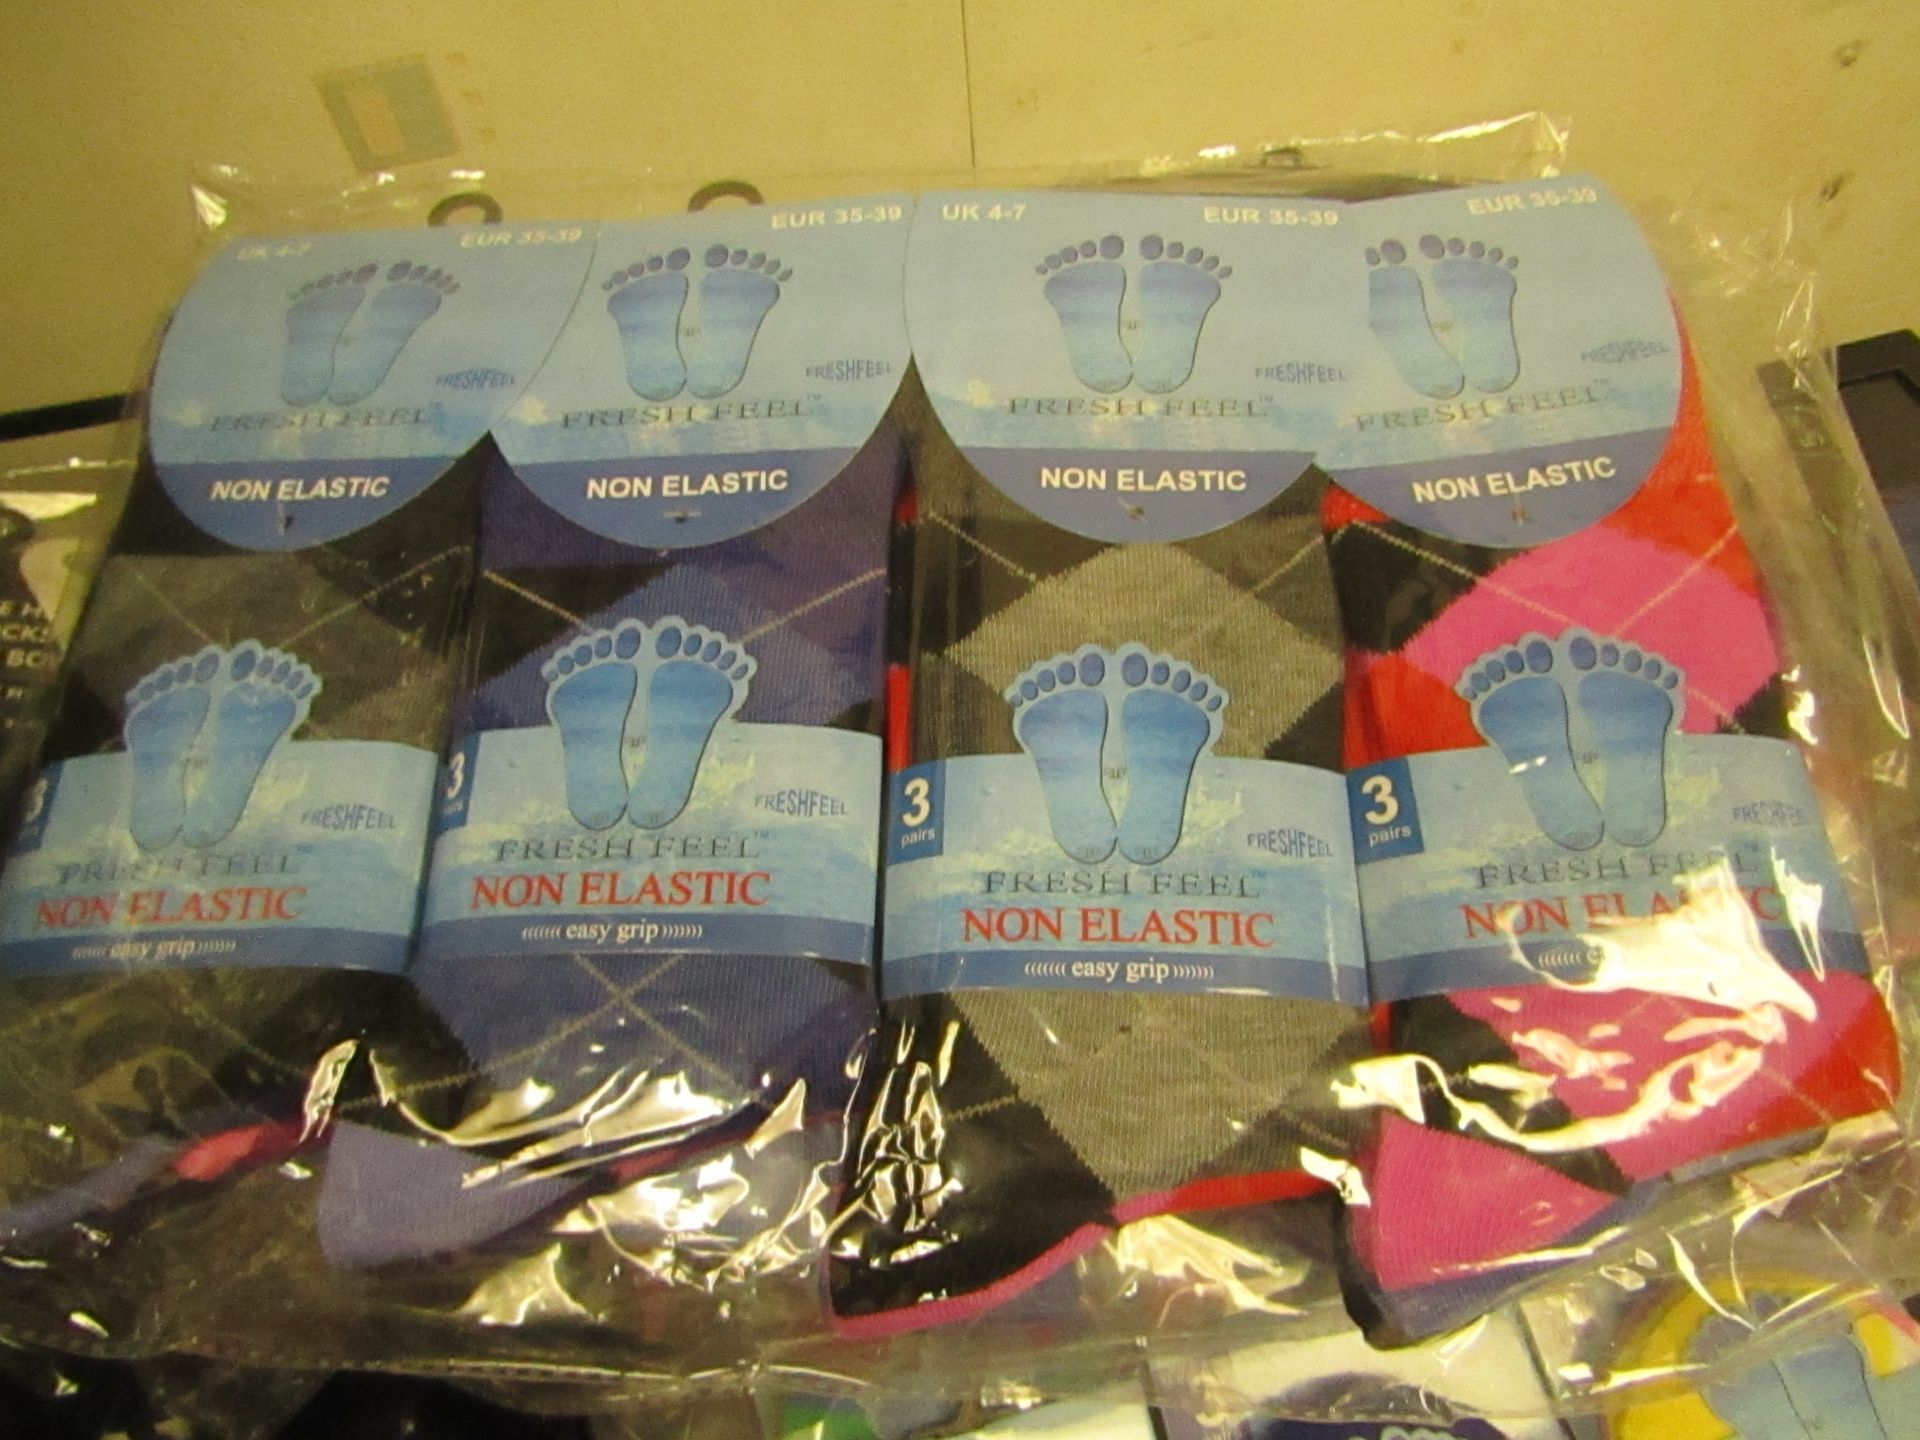 12 X Pairs of Fresh Feel Ladies Non Elastic Socks size 4-7 New & Packaged see iomage for design